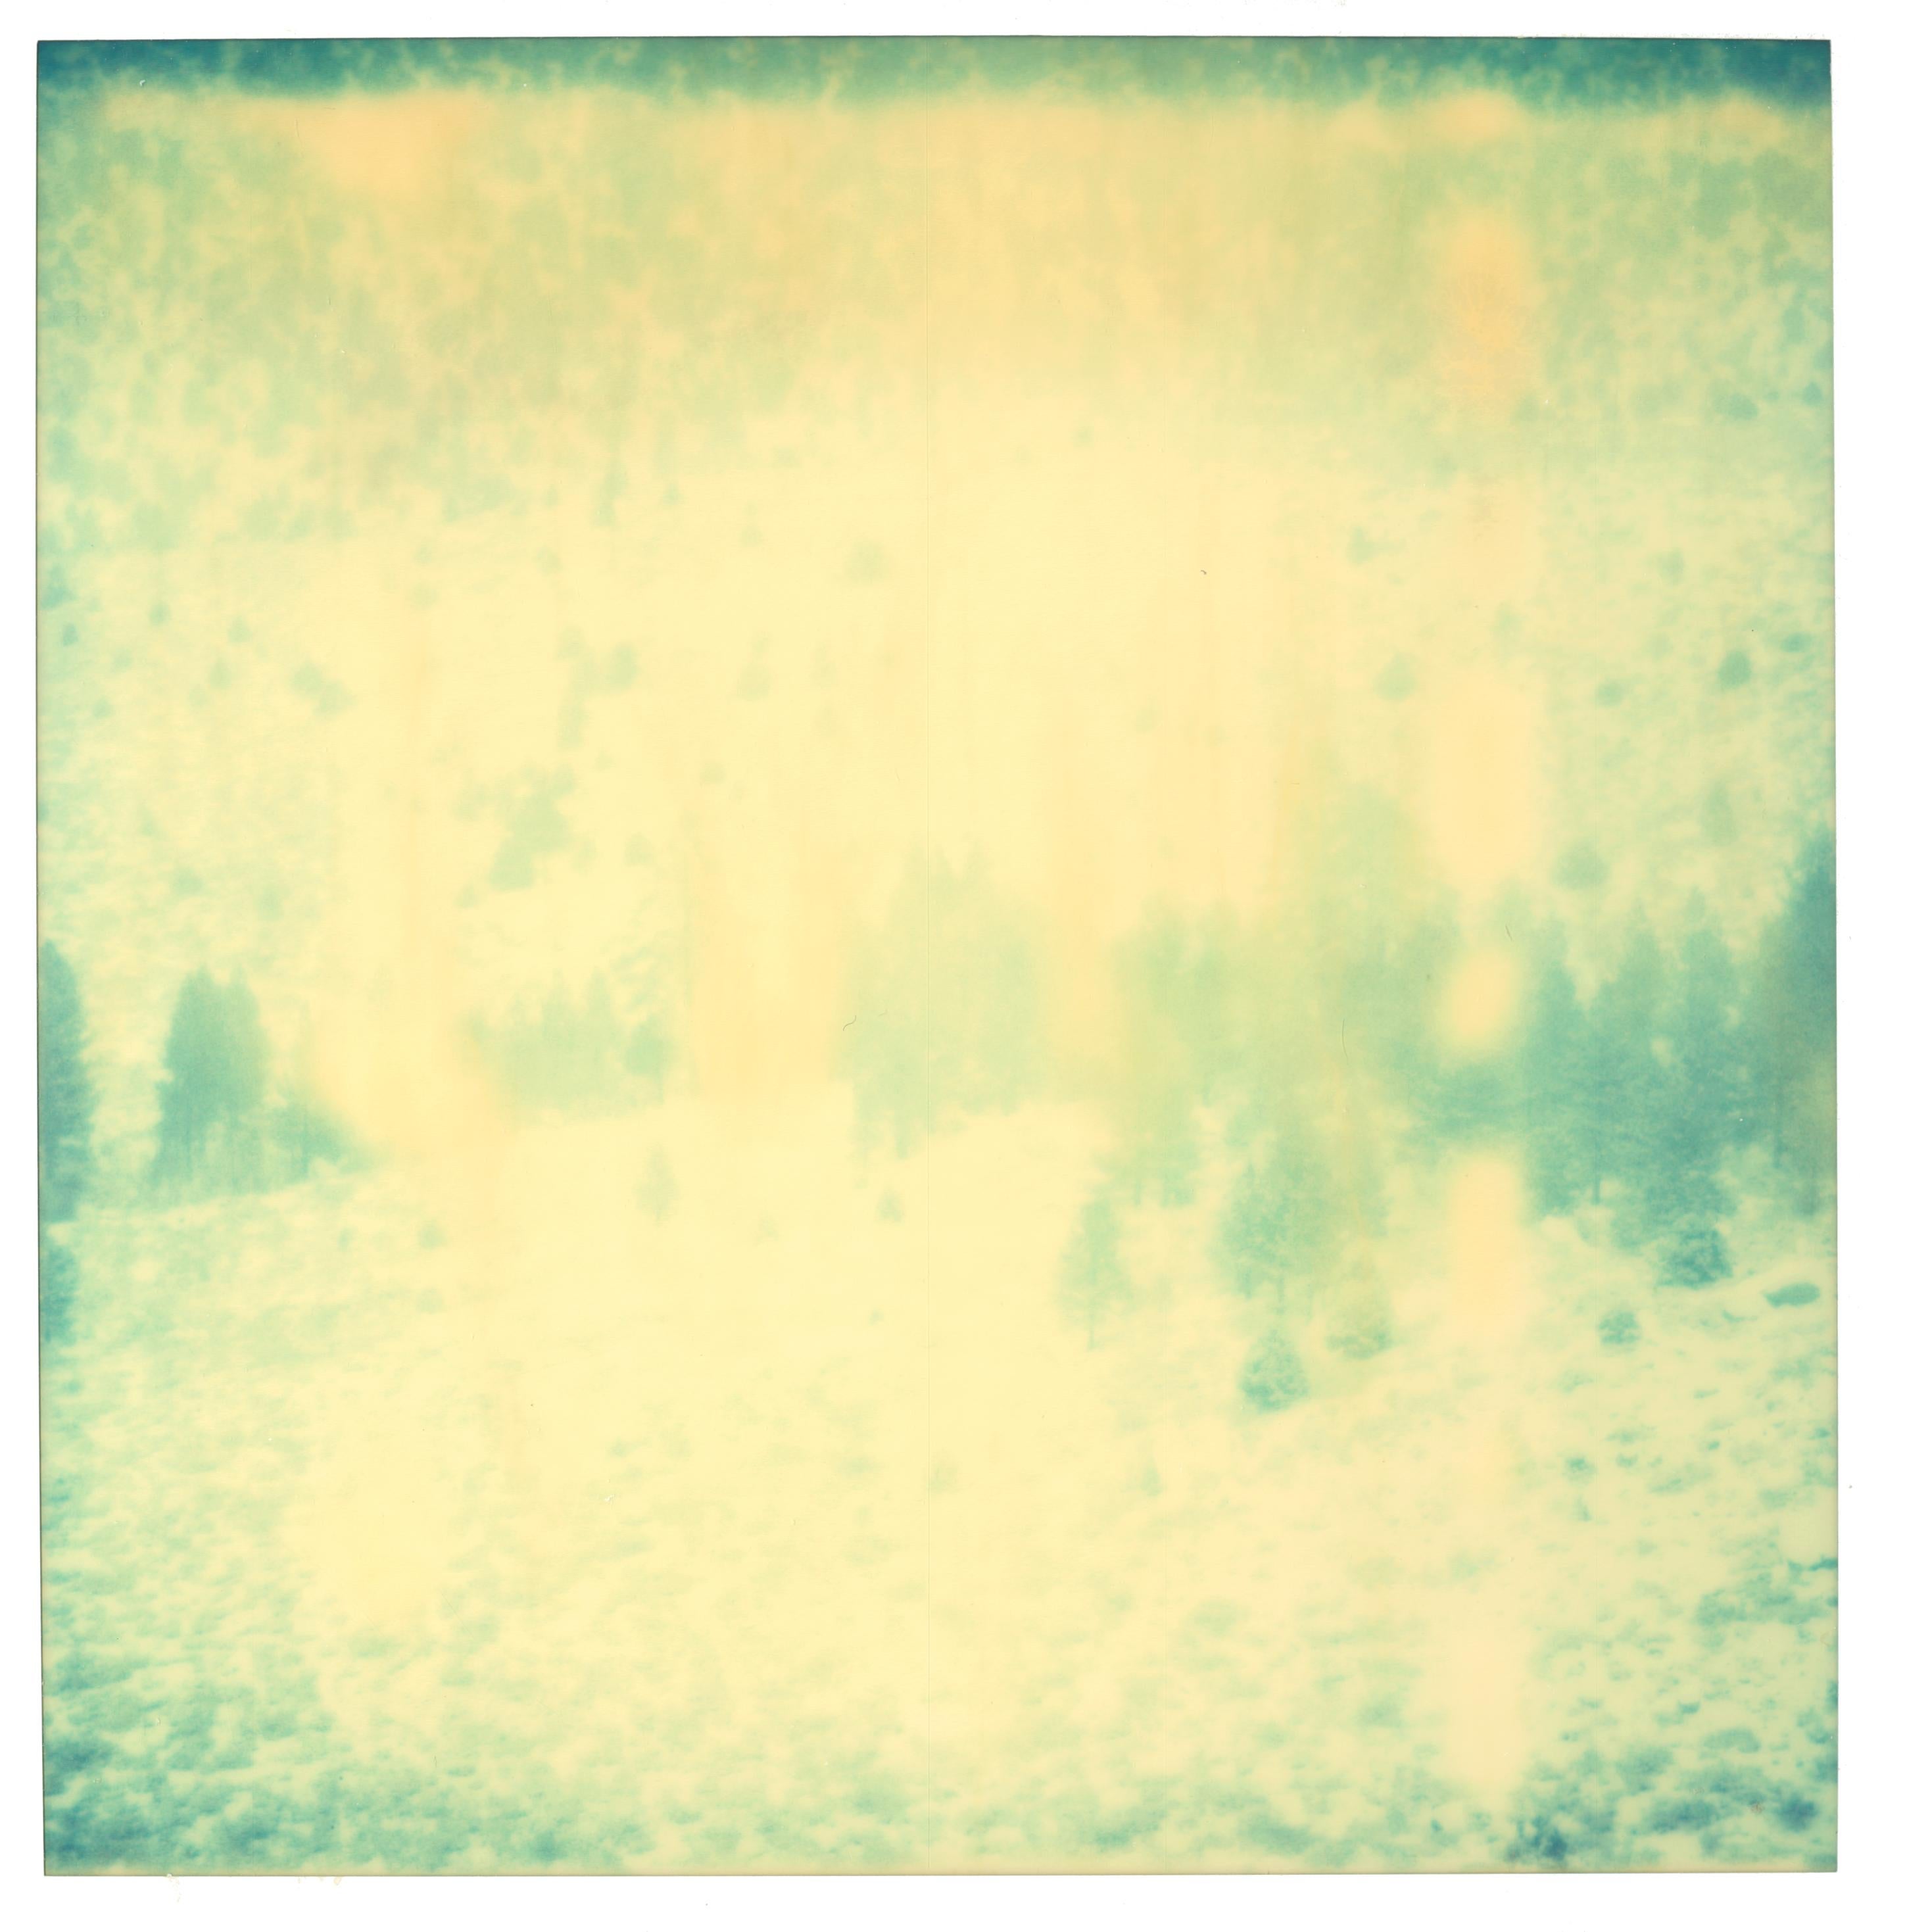 Memories of Green II, triptych, Edition 1/5 , 2003
each 58x56cm, installed with gaps 58x178cm, 
analog C-Print, hand-printed by the artist on Fuji Crystal Archive Paper,
based on a Polaroid, Artist inventory Number 1151.02
mounted on Aluminum with